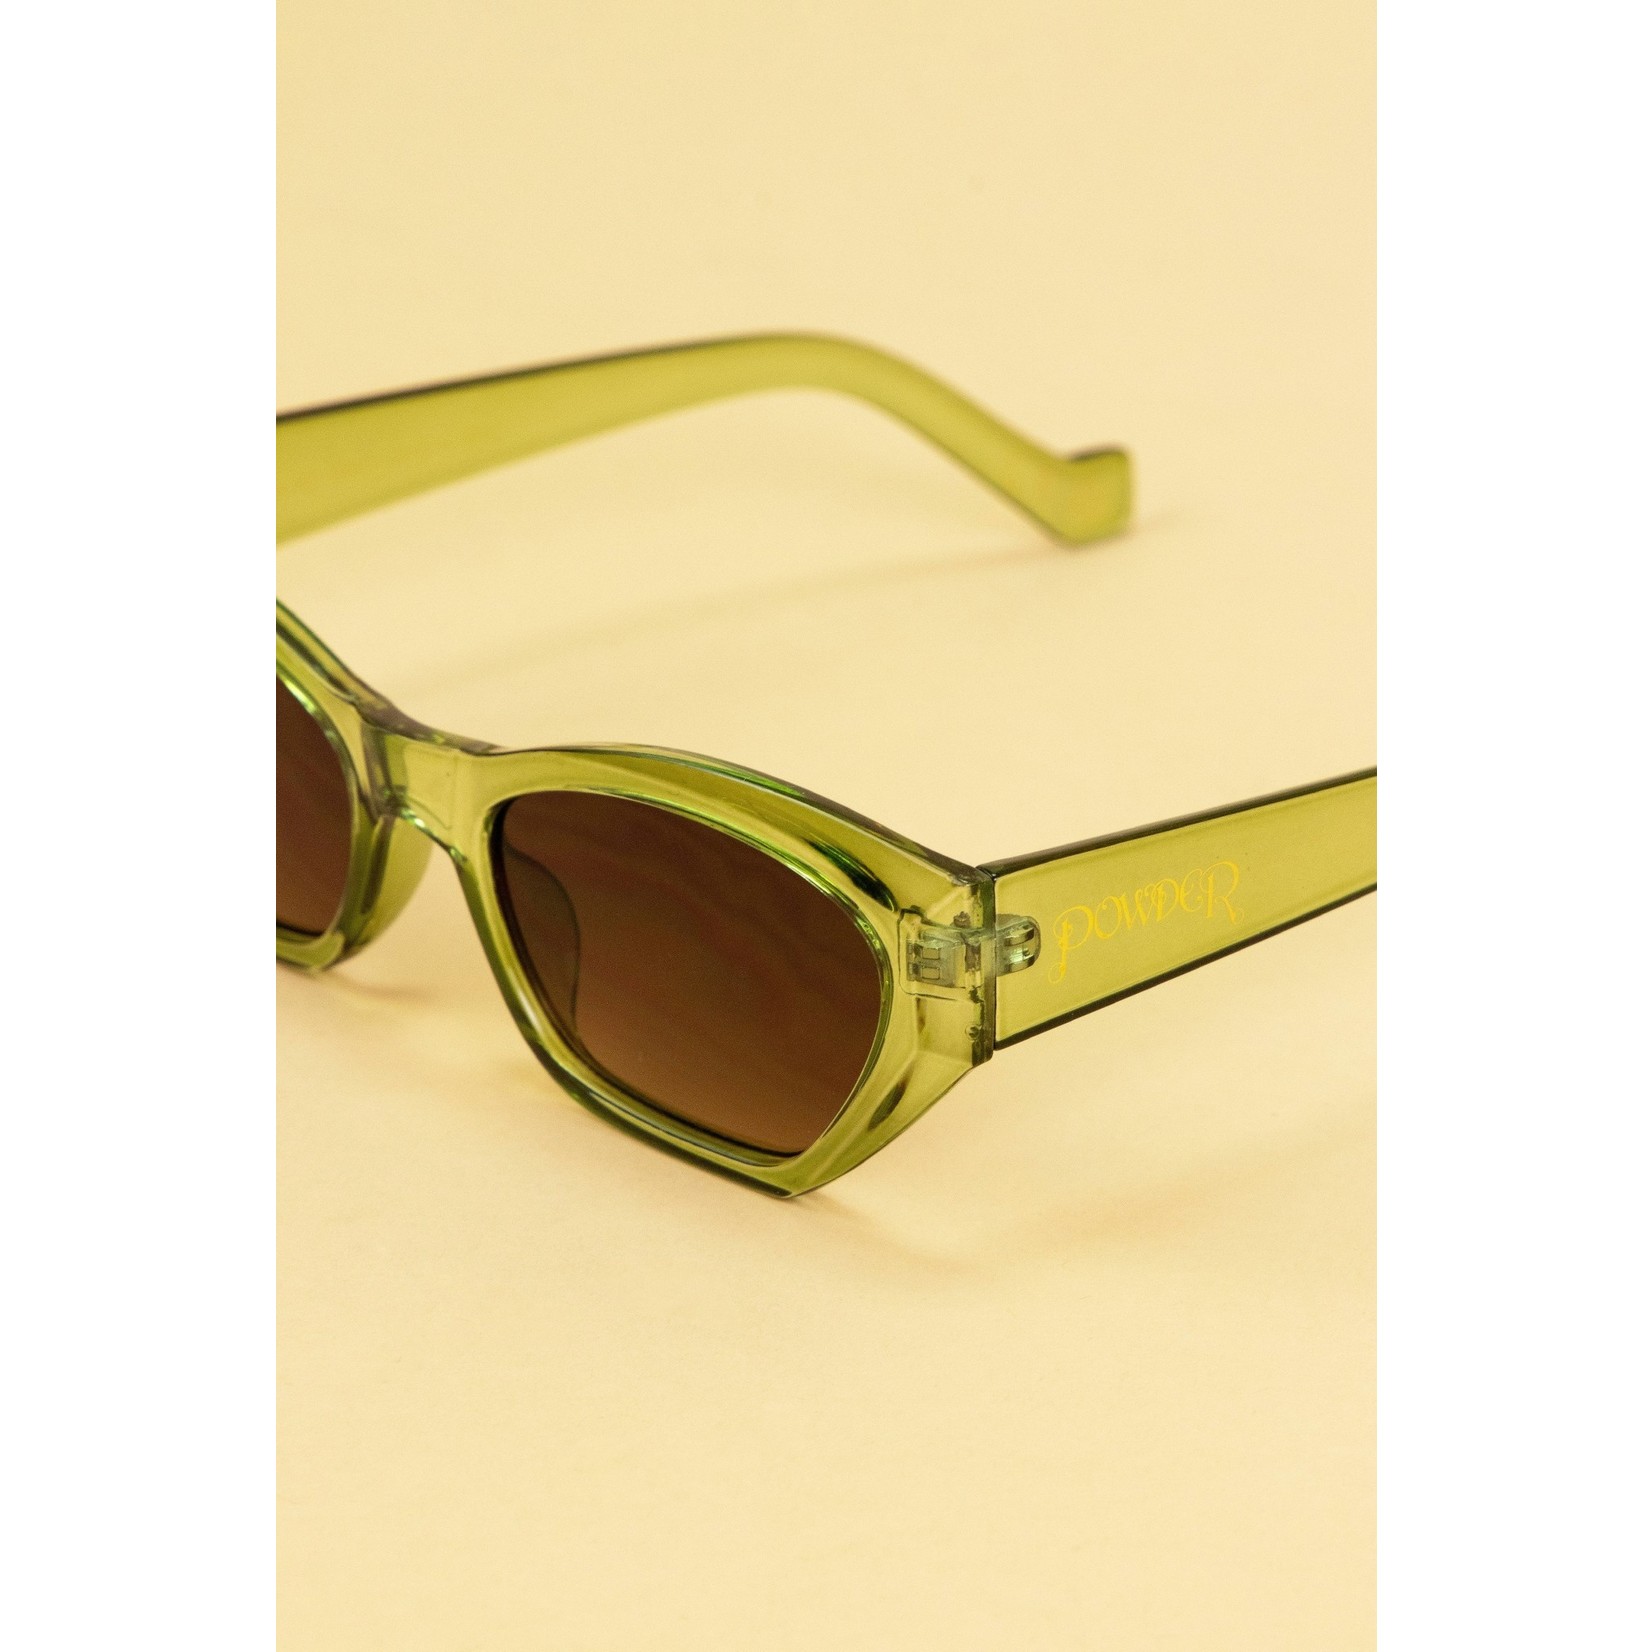 Powder Harlow Sunglasses in Forest Green